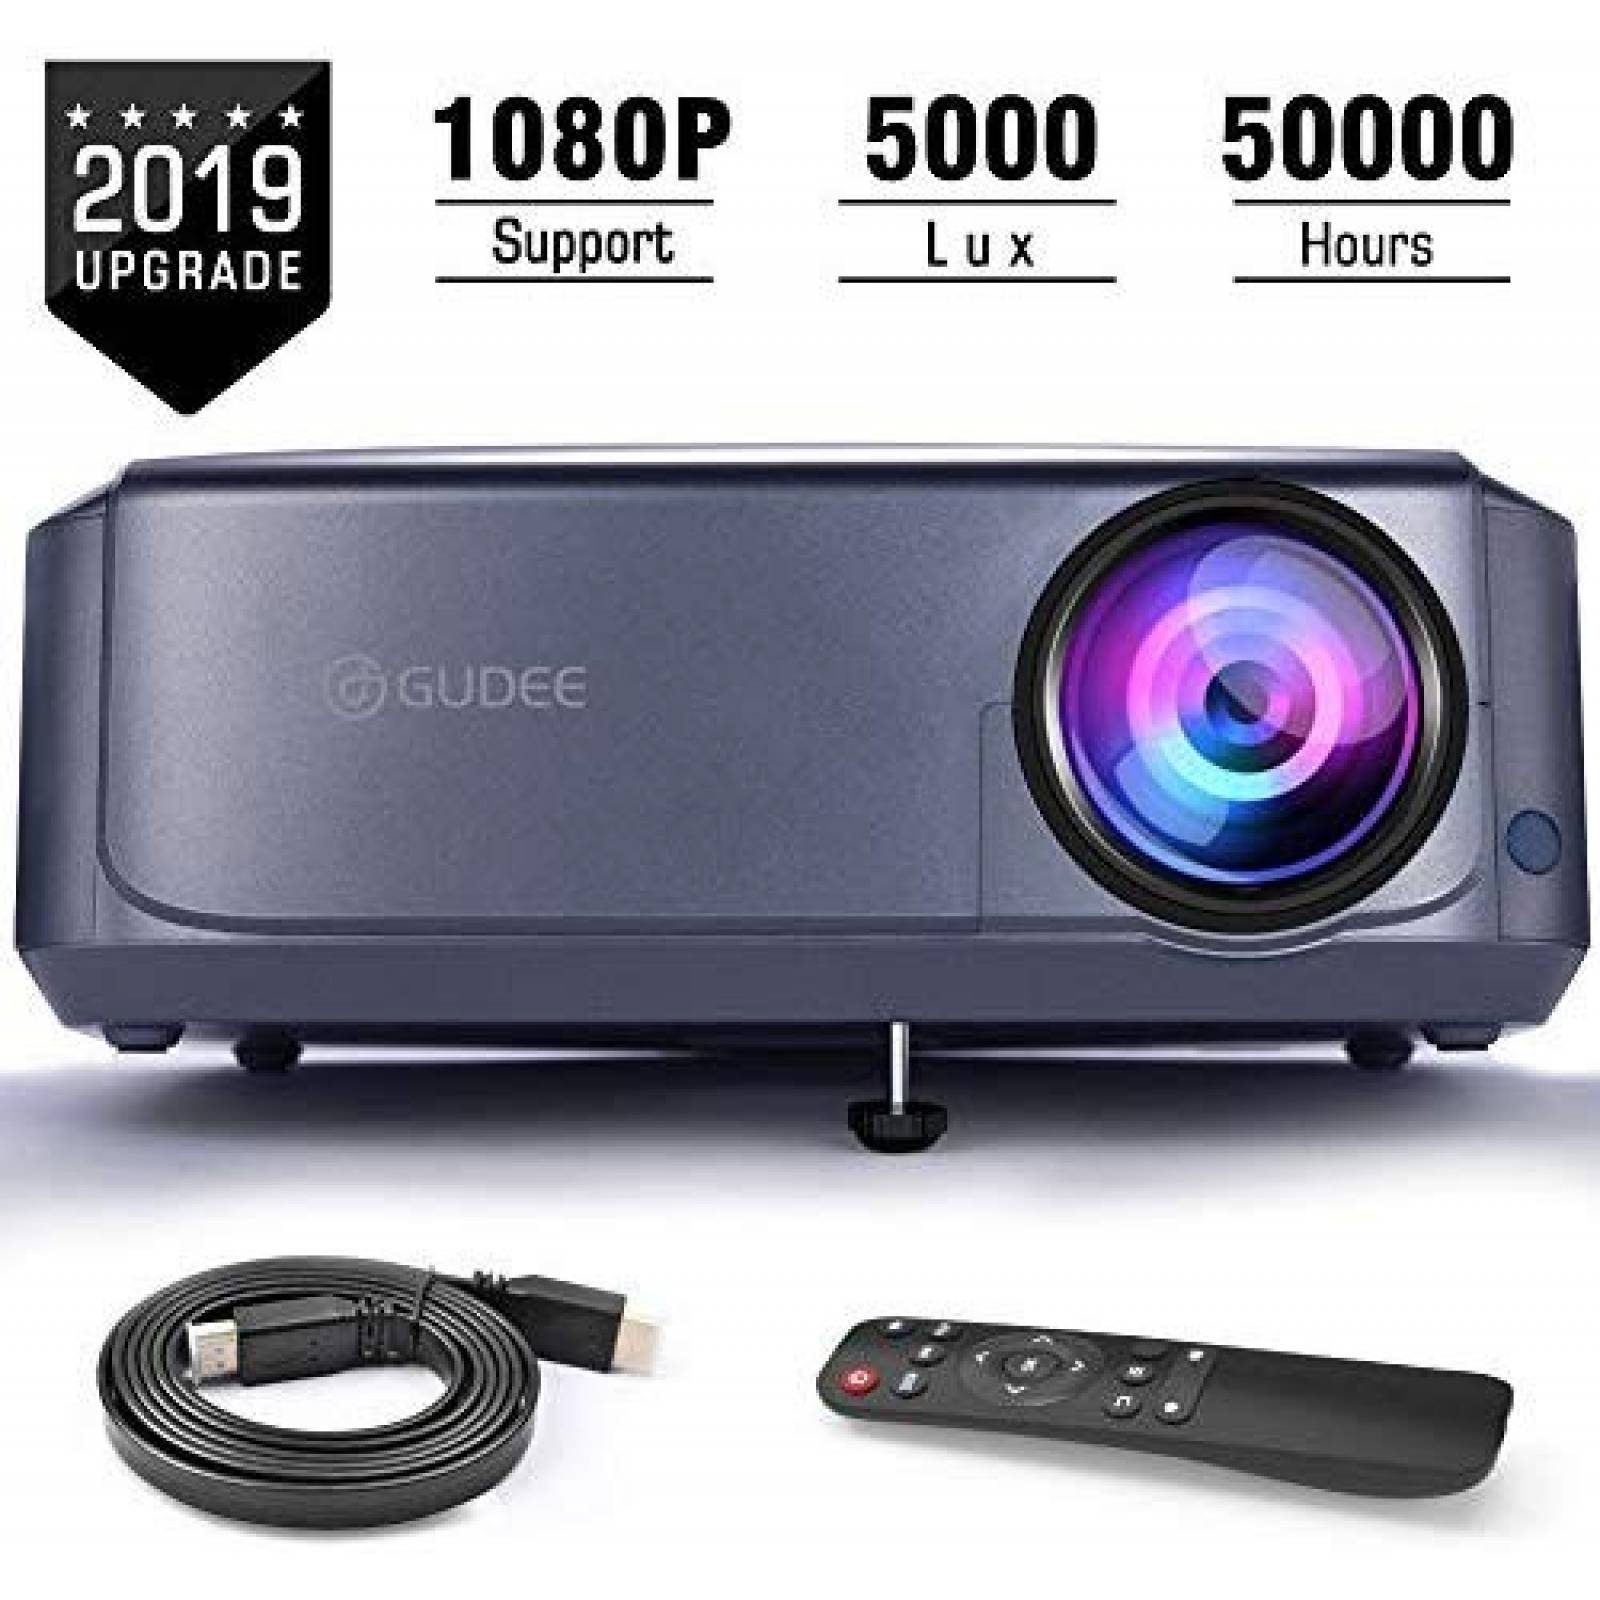 Videoproyector GUDEE Full HD1080P 5000Lux p/ PS4, HDMI, USB